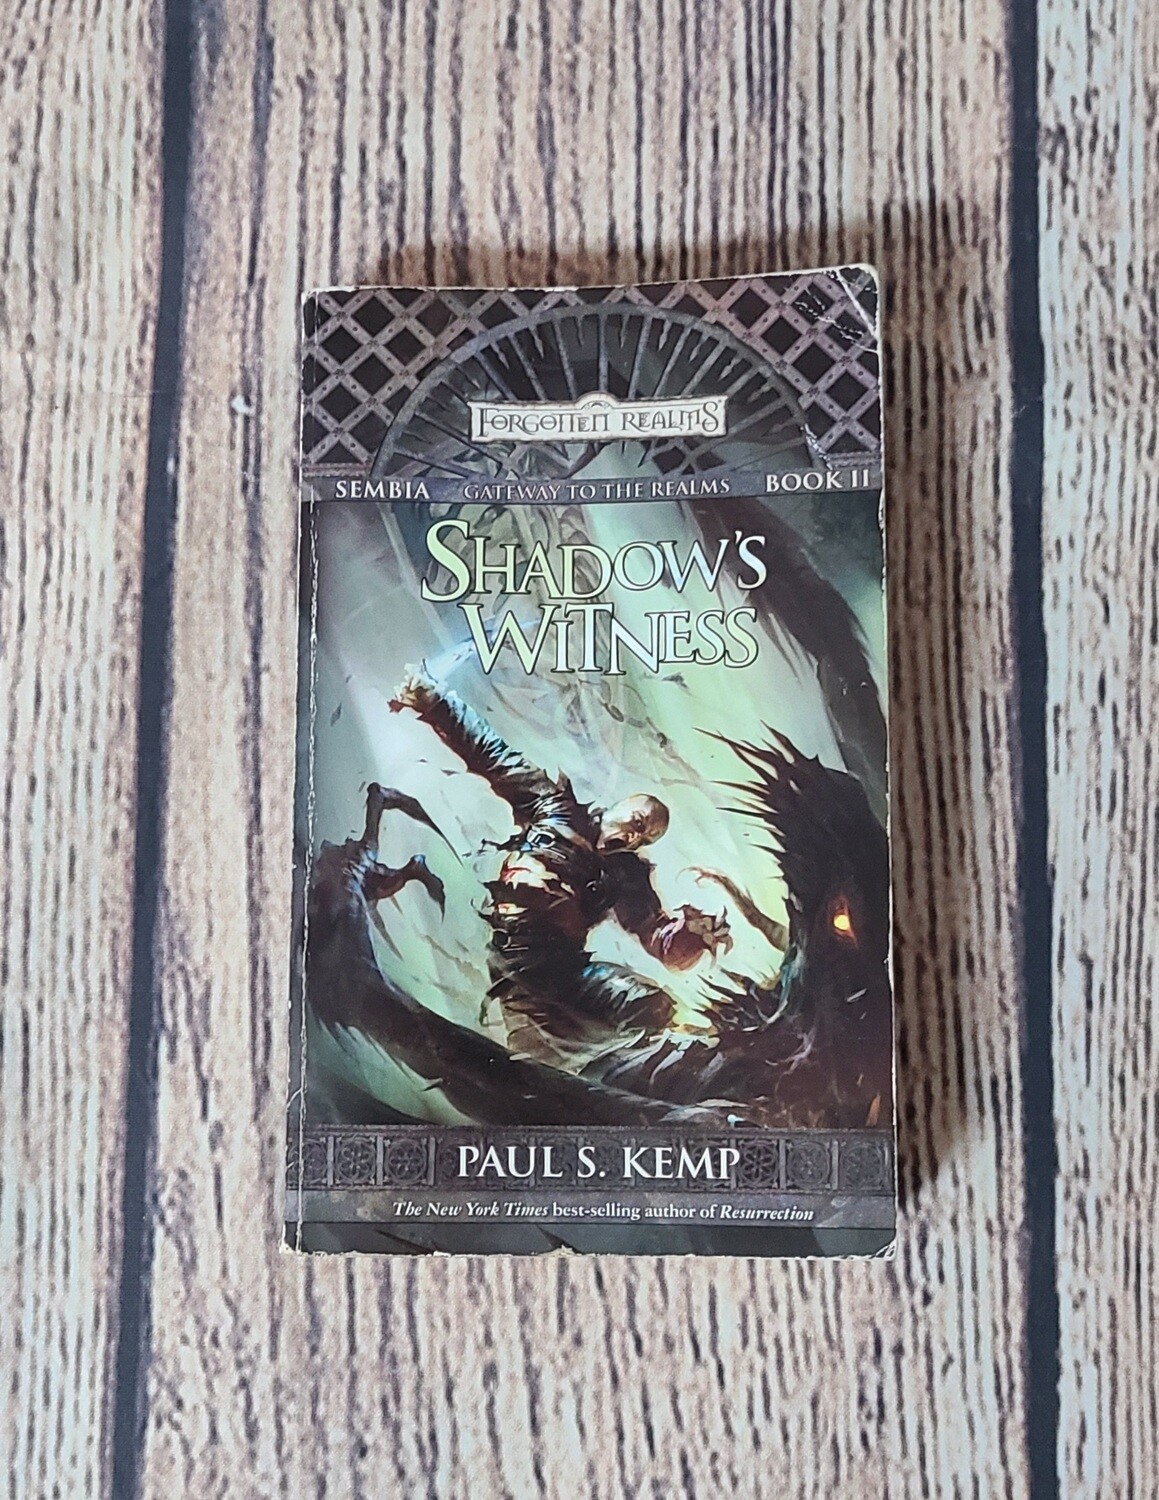 Gateway to the Realms: Shadow's Witness by Paul S. Kemp